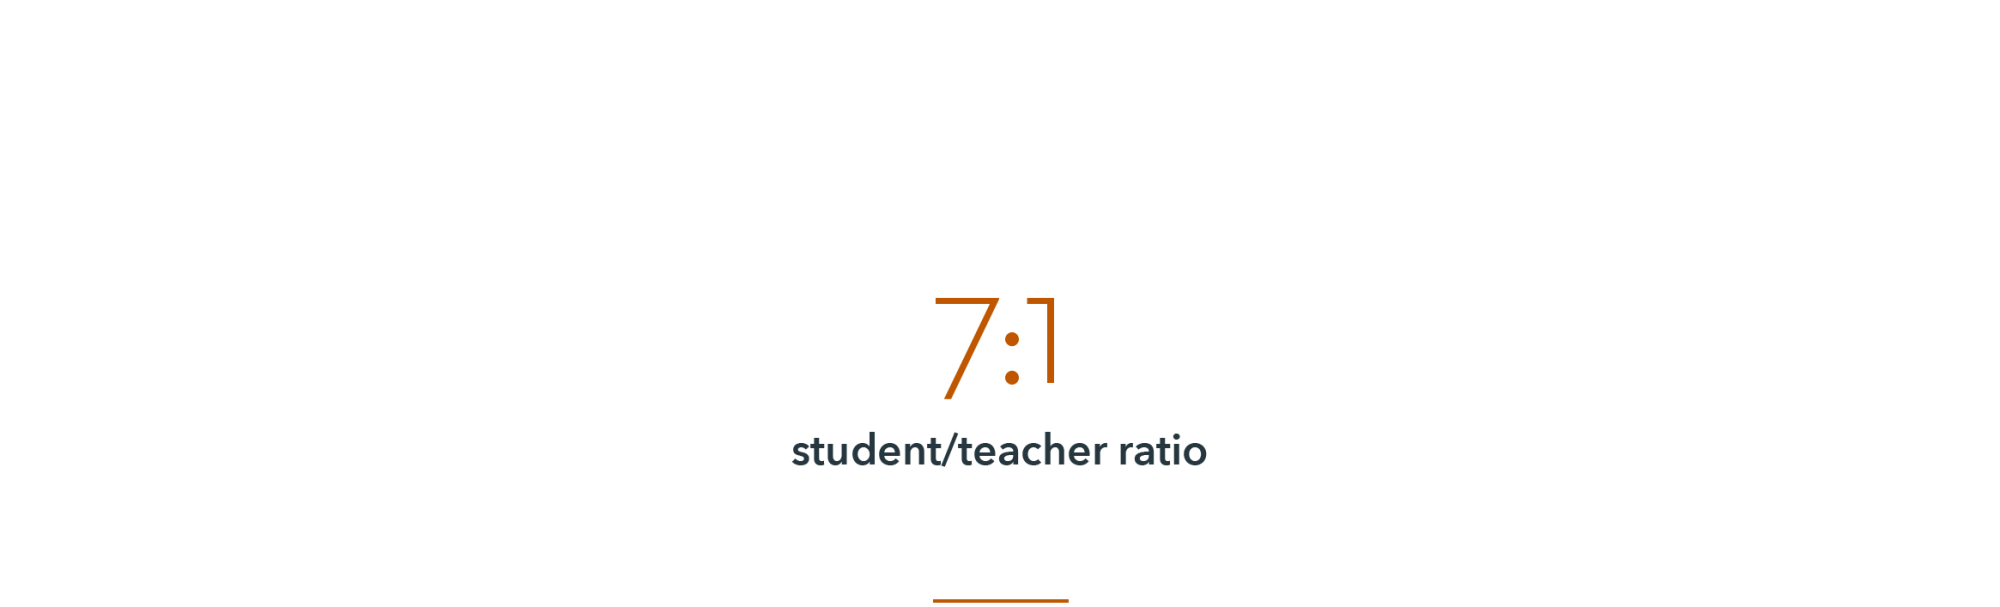 Infographic: 7 to 1 student/faculty ratio